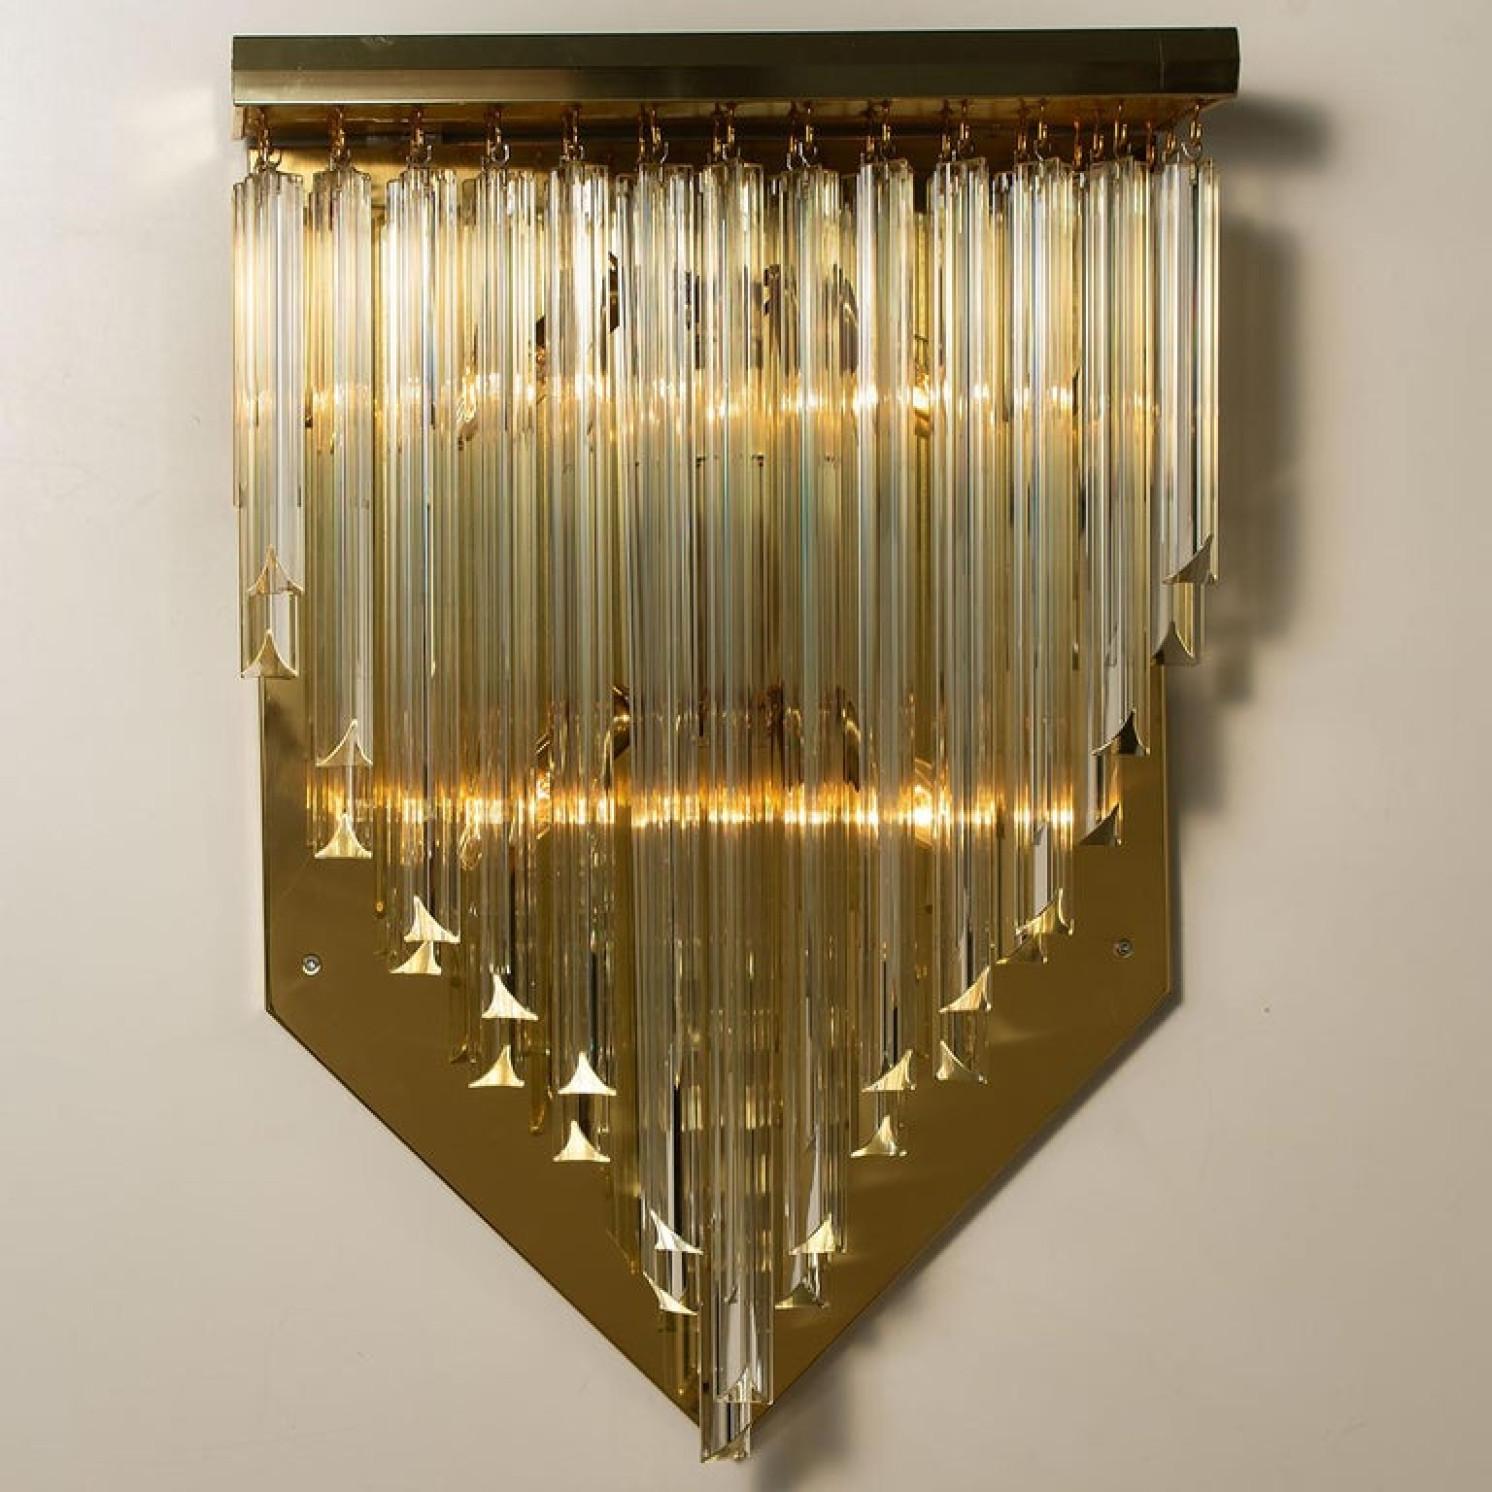 Exeptional high-end XXL Venini style murano wall fixtures. Each XXL wall sconce is featuring several crystal clear glass 